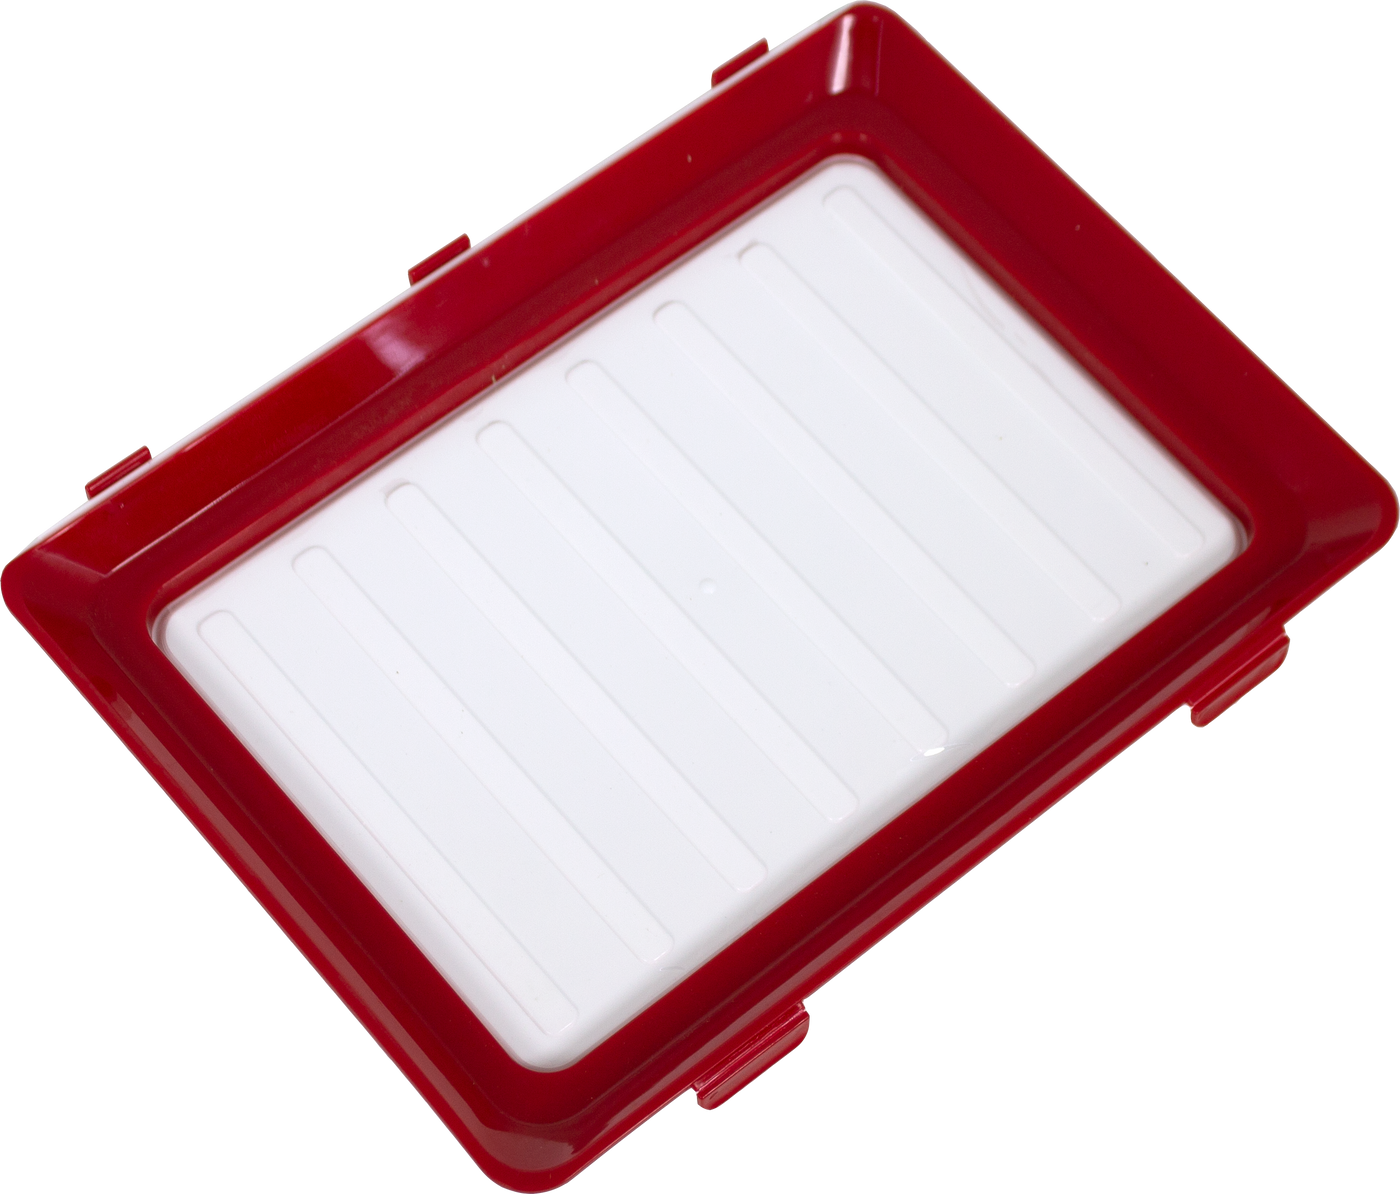 CleverTray - the instant wrap solution, set of 2 trays